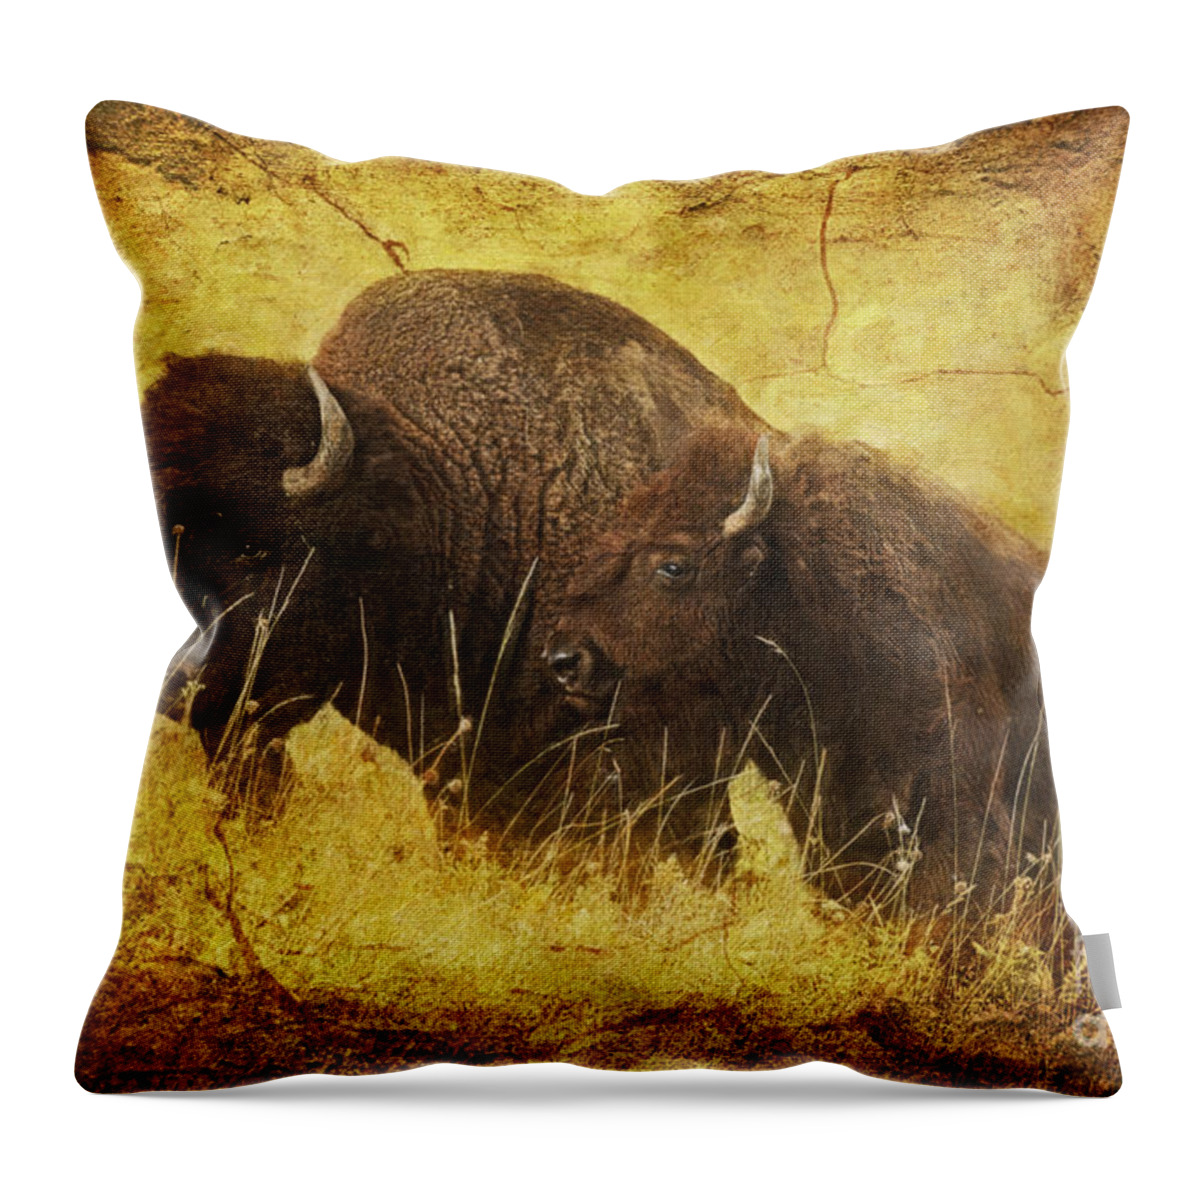 Bison Throw Pillow featuring the digital art Parent and Child - American Bison by Lianne Schneider